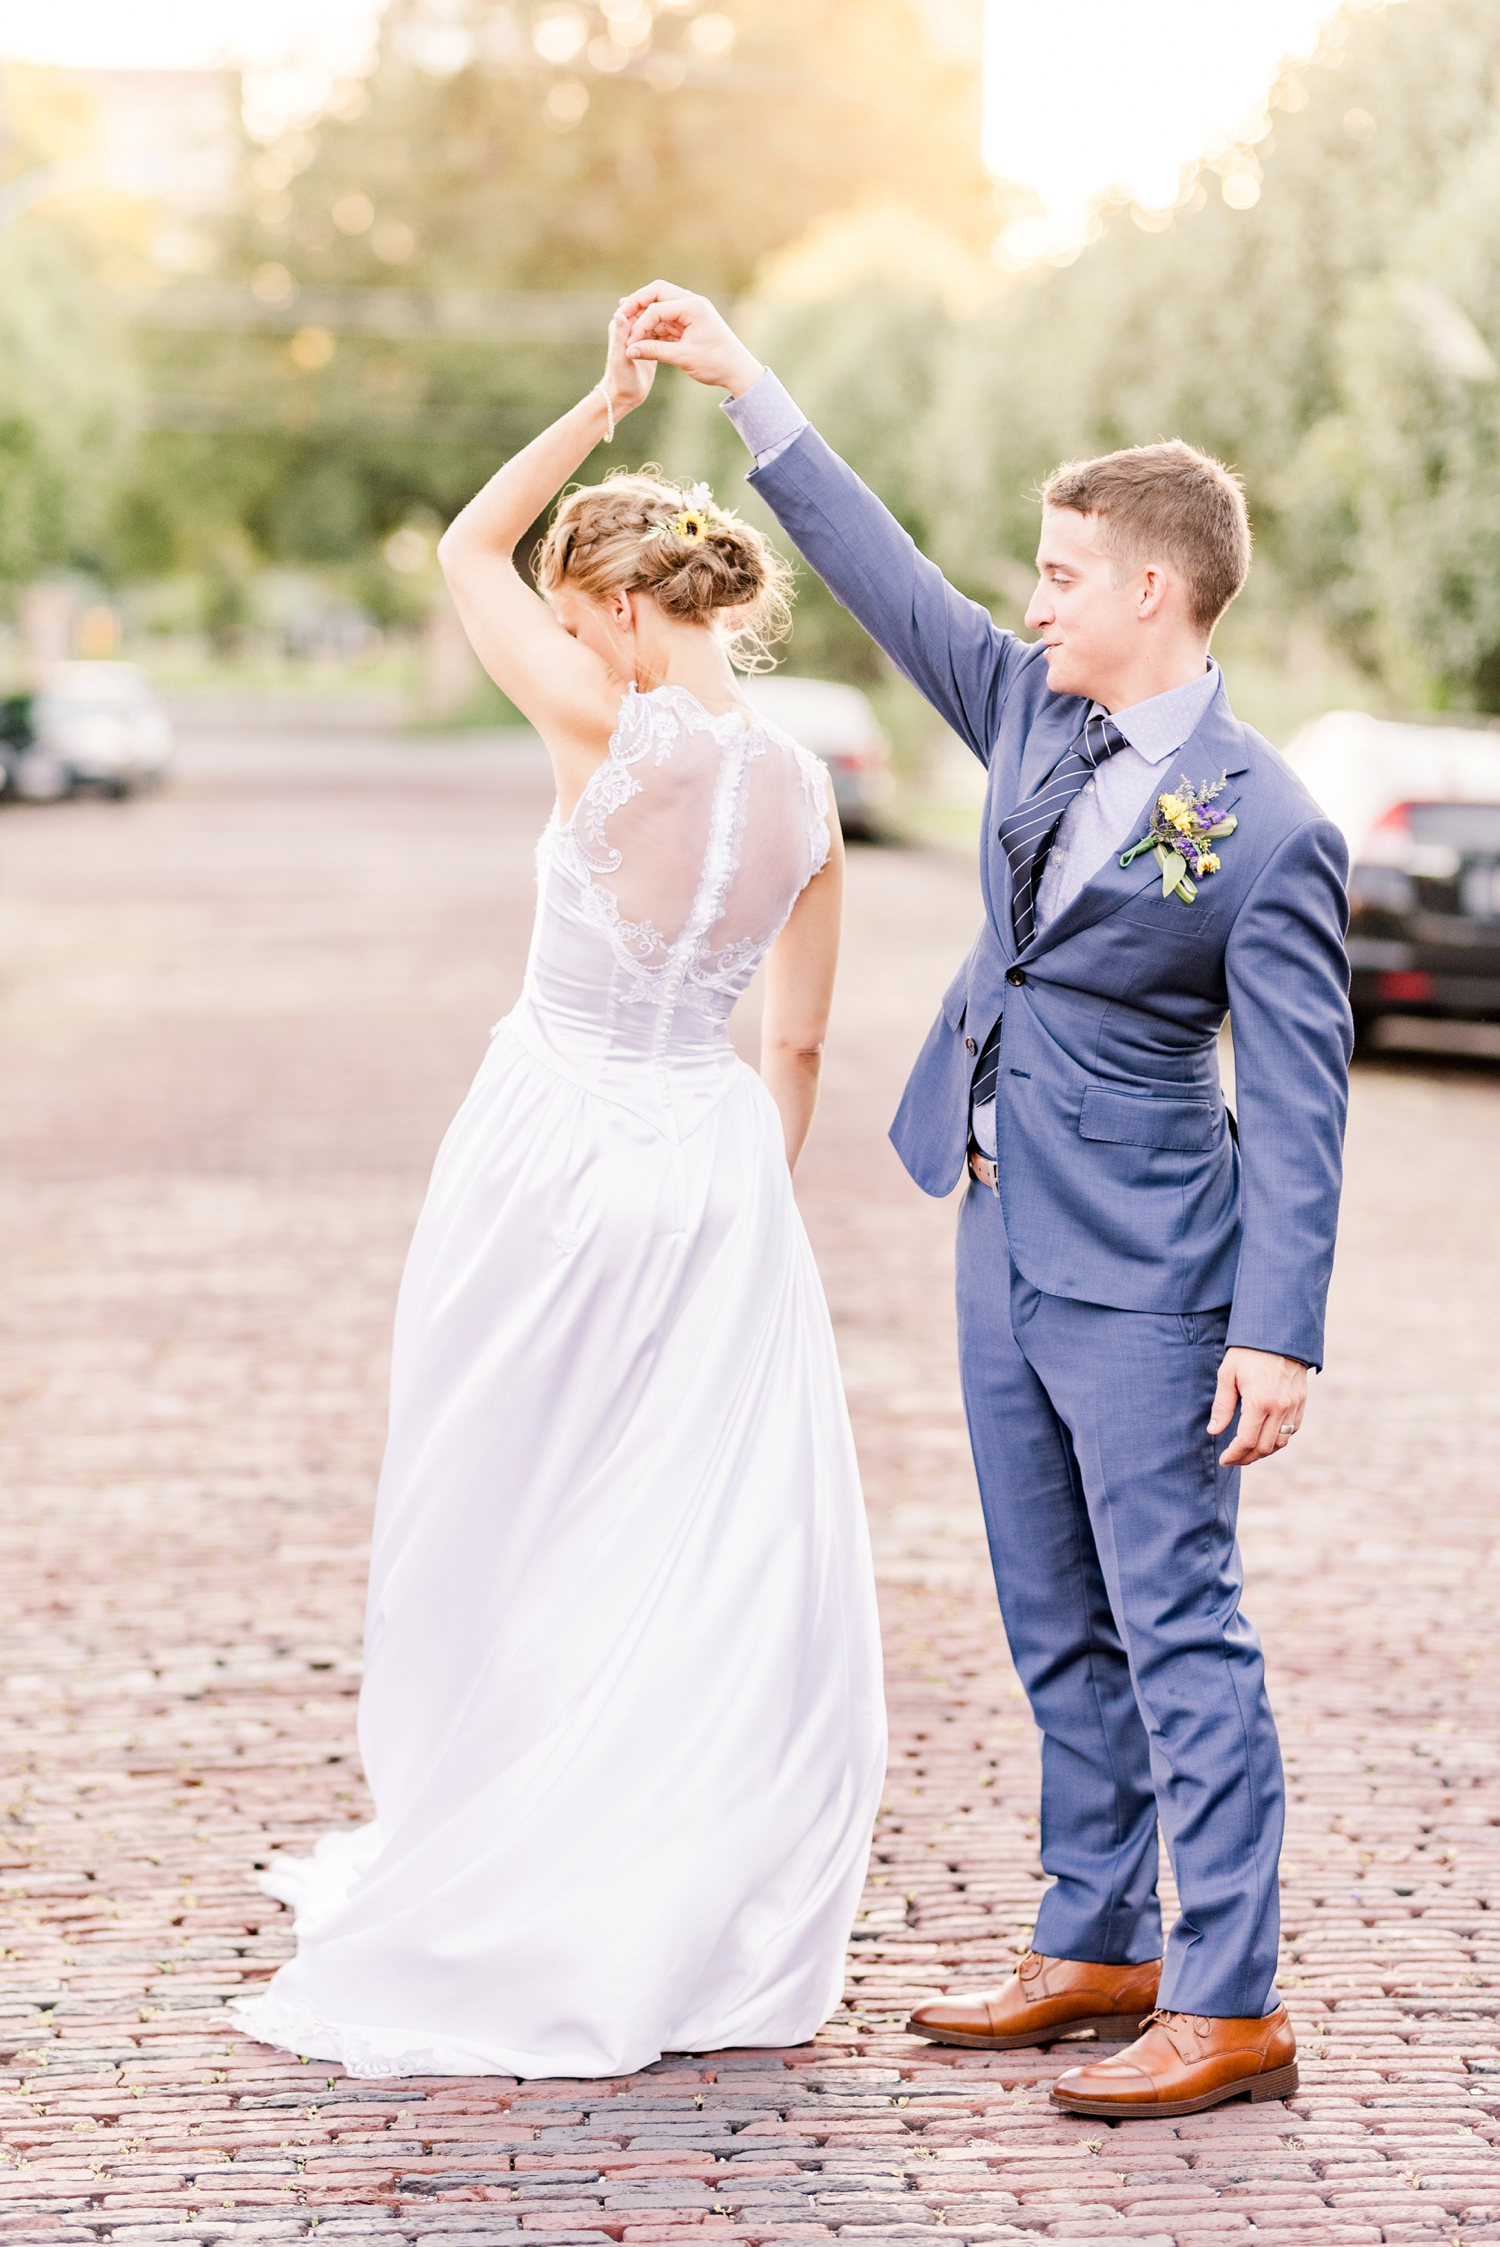 light-and-airy-wedding-photography